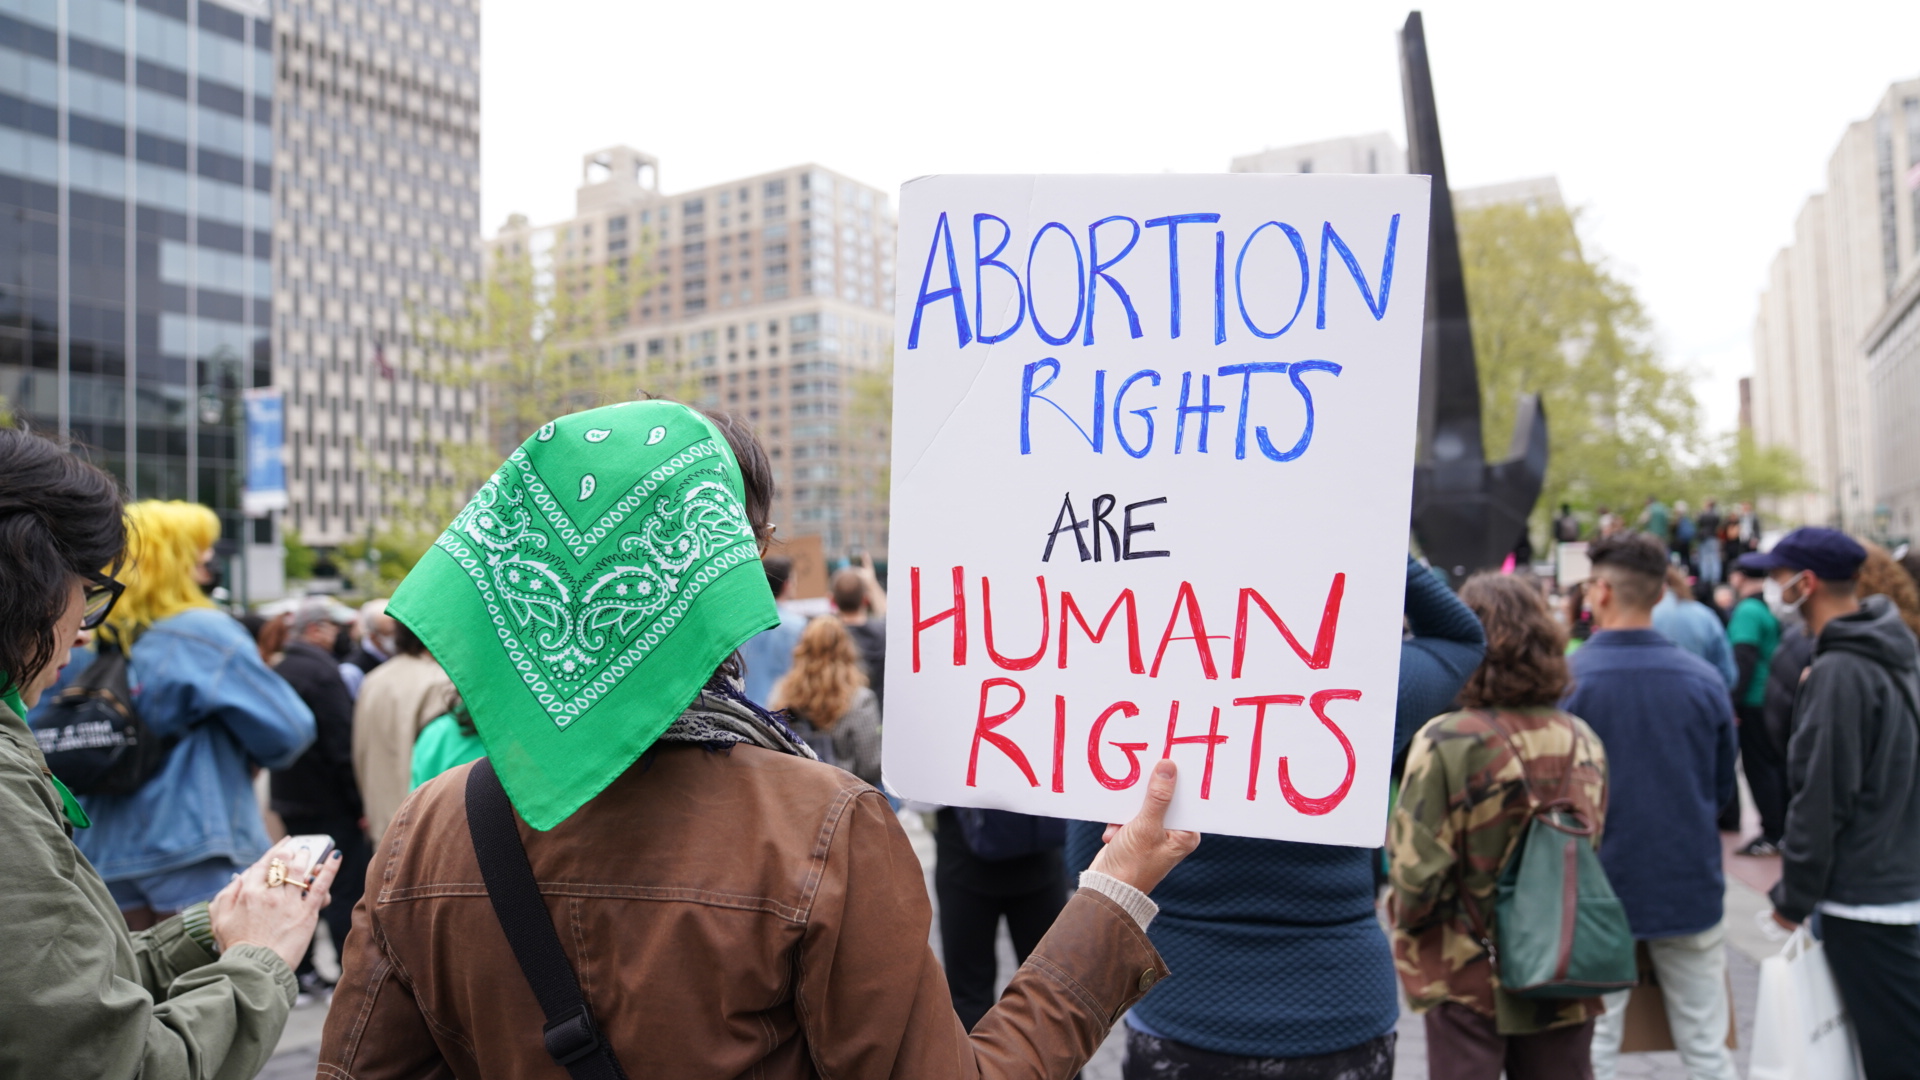 A protester with a sign that reads “Abortion Rights Are Human Rights.”